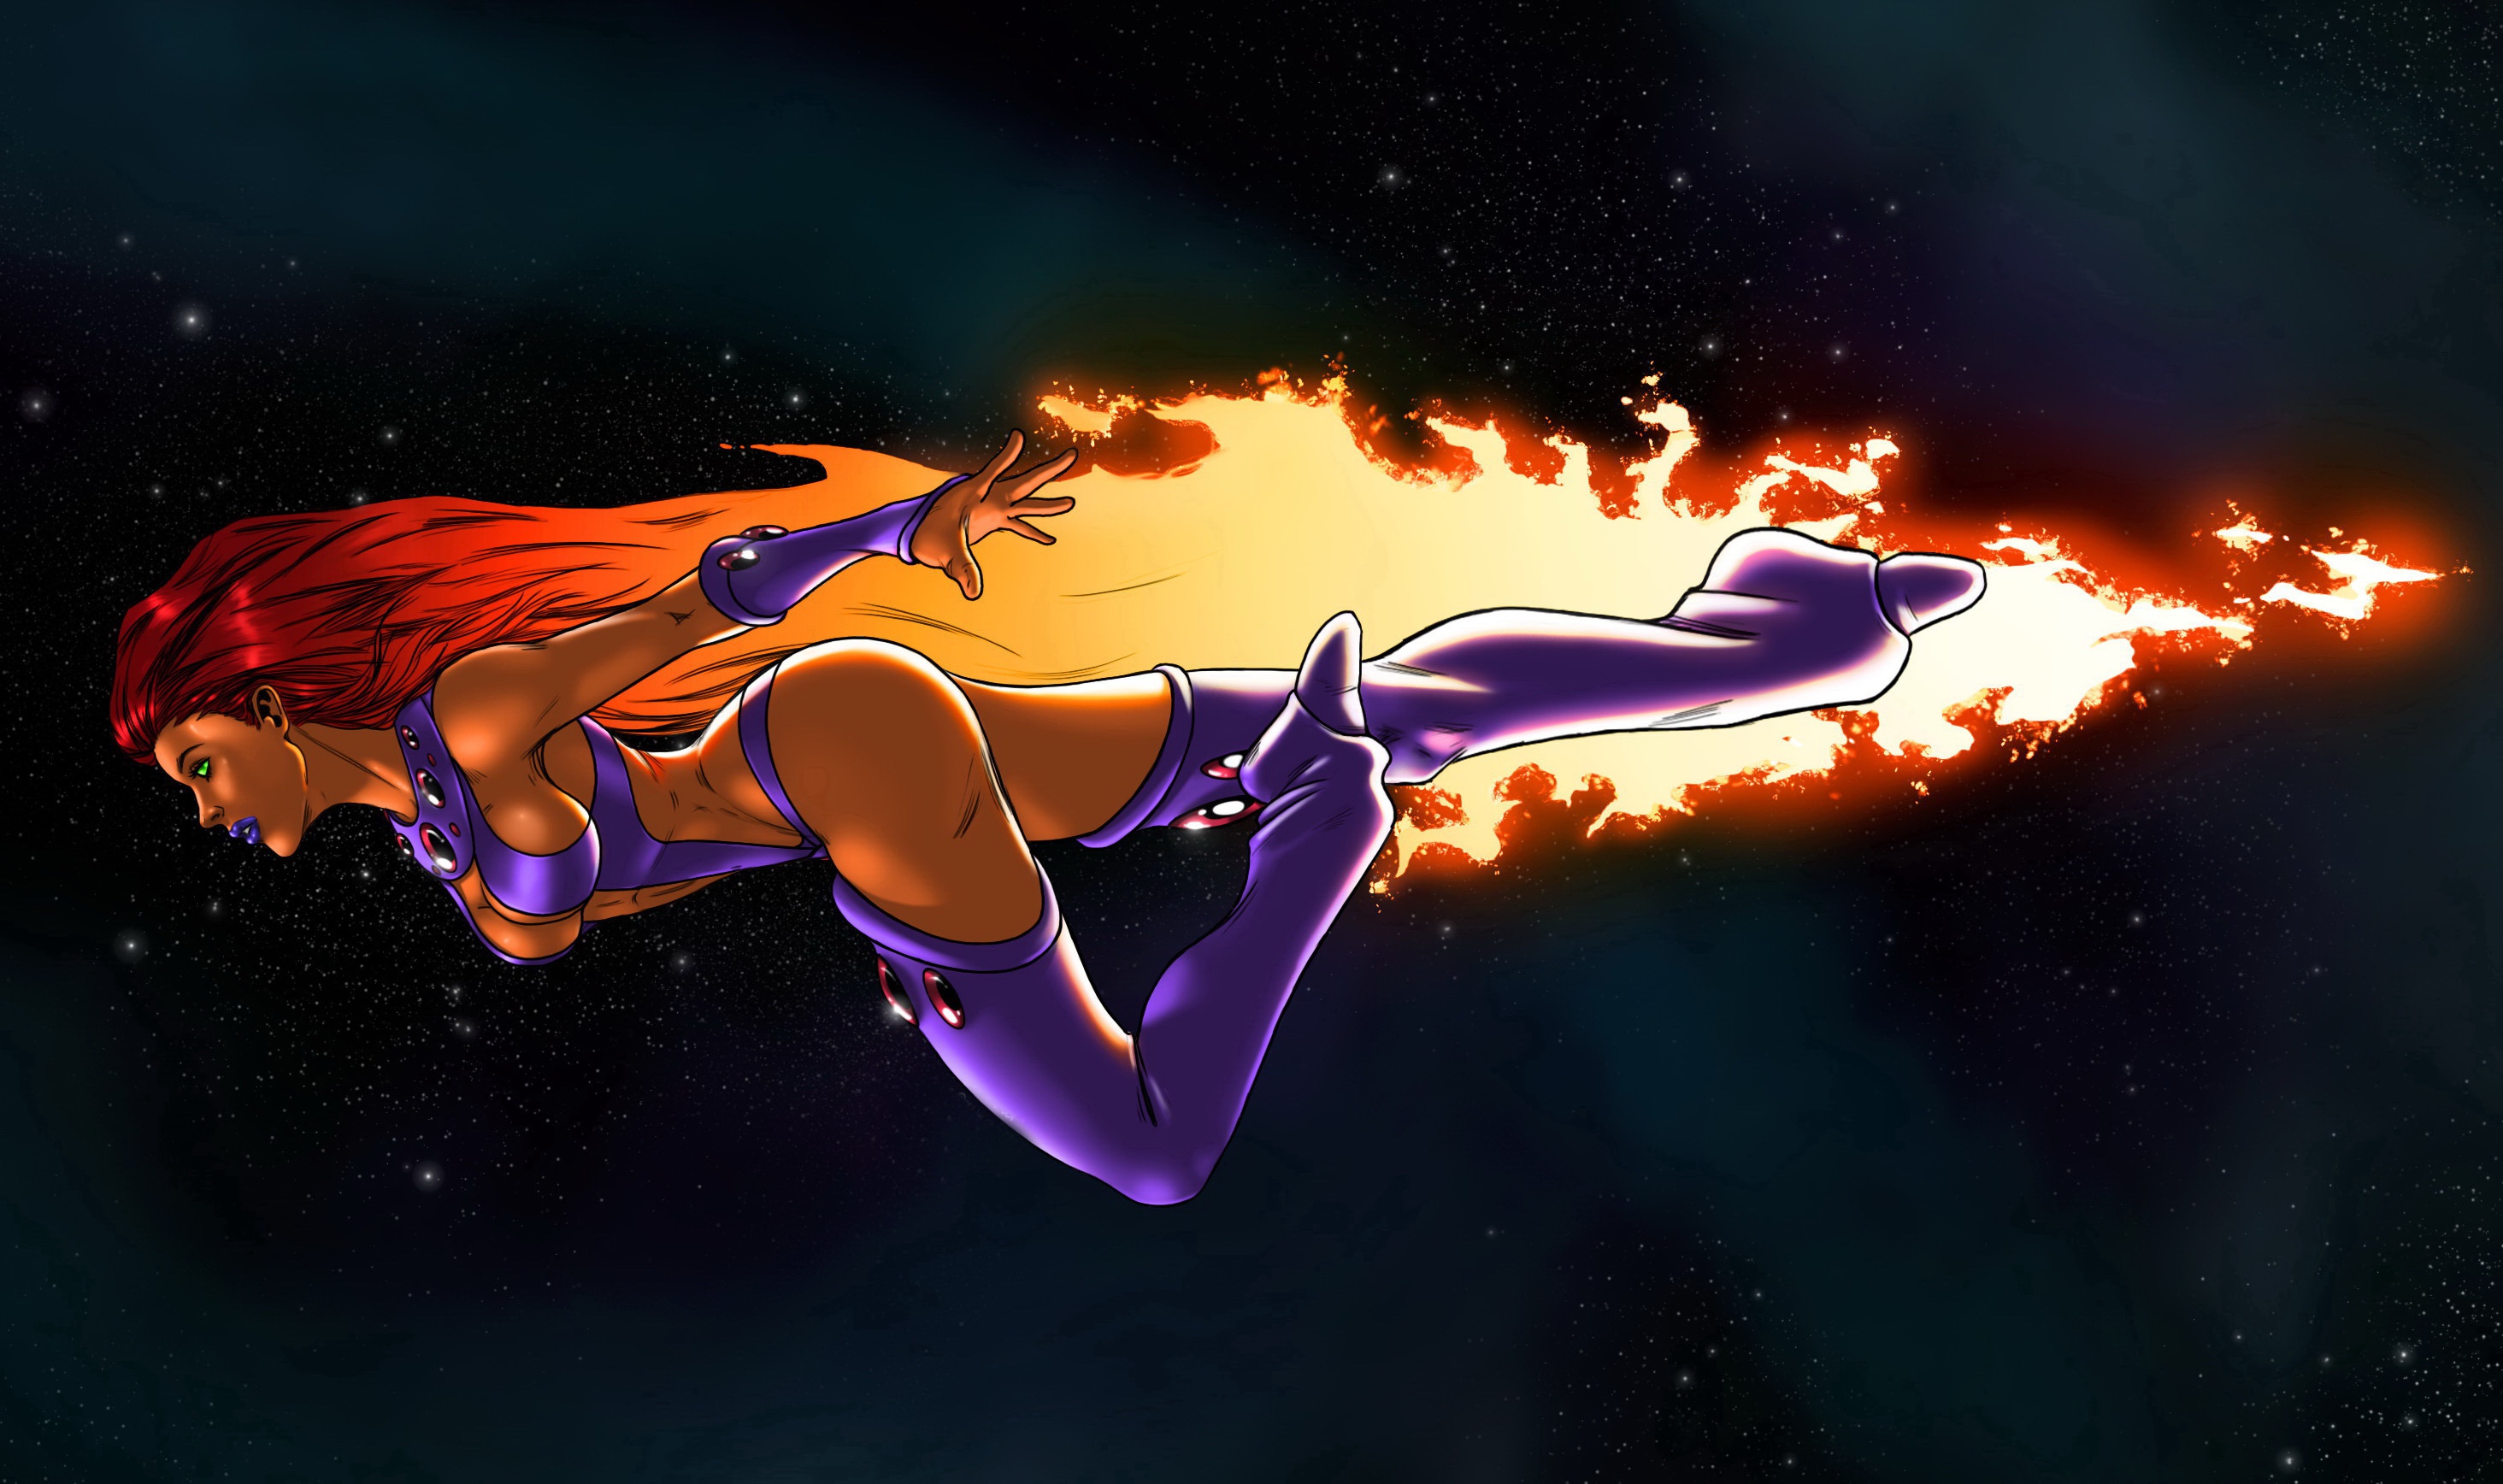 Starfire Wallpapers HD Starfire Backgrounds Free Images Download